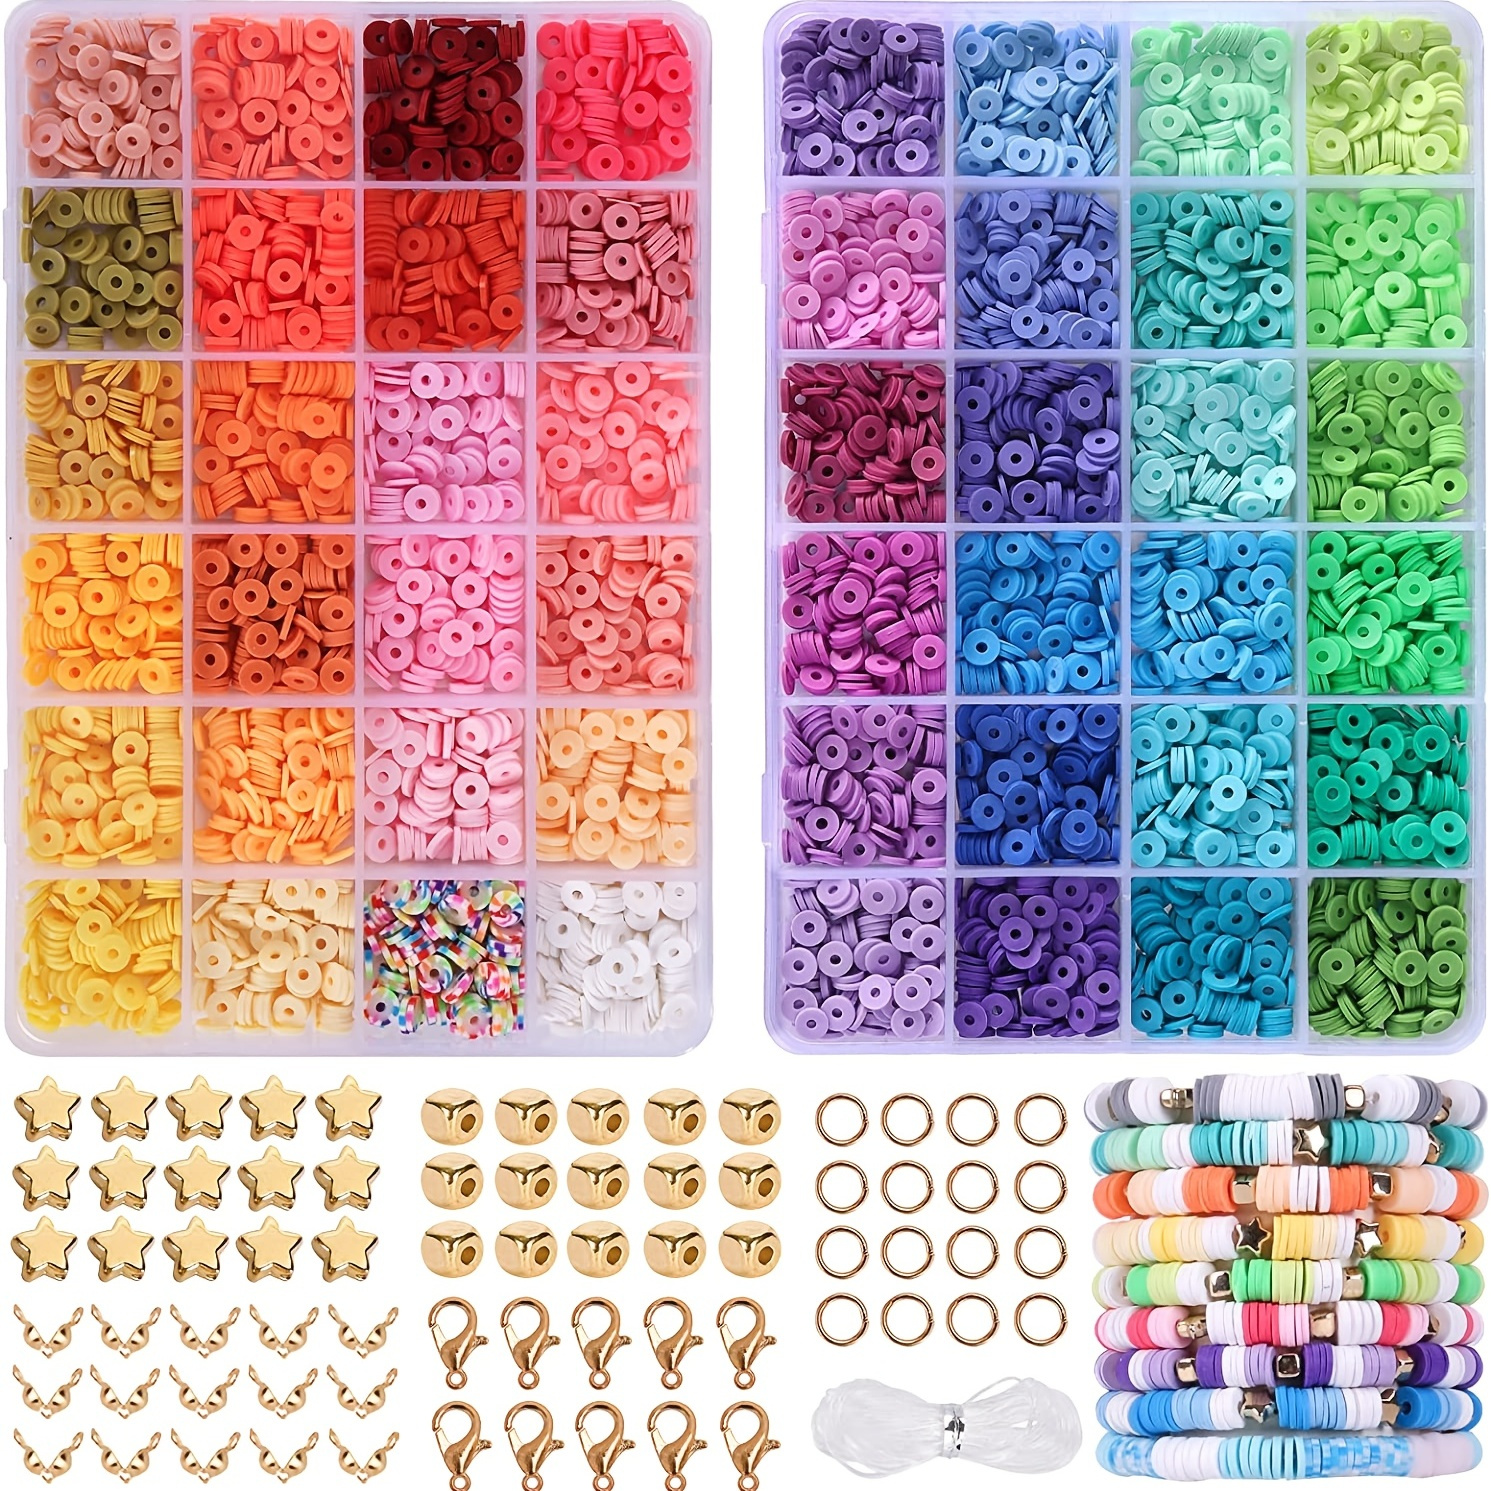 

4800pcs Clay Beads For Diy Bracelet Making, 48 Colors Flat Round Polymer Clay Beads, Spacer Beads For Birthday Gifts, Diy Materials